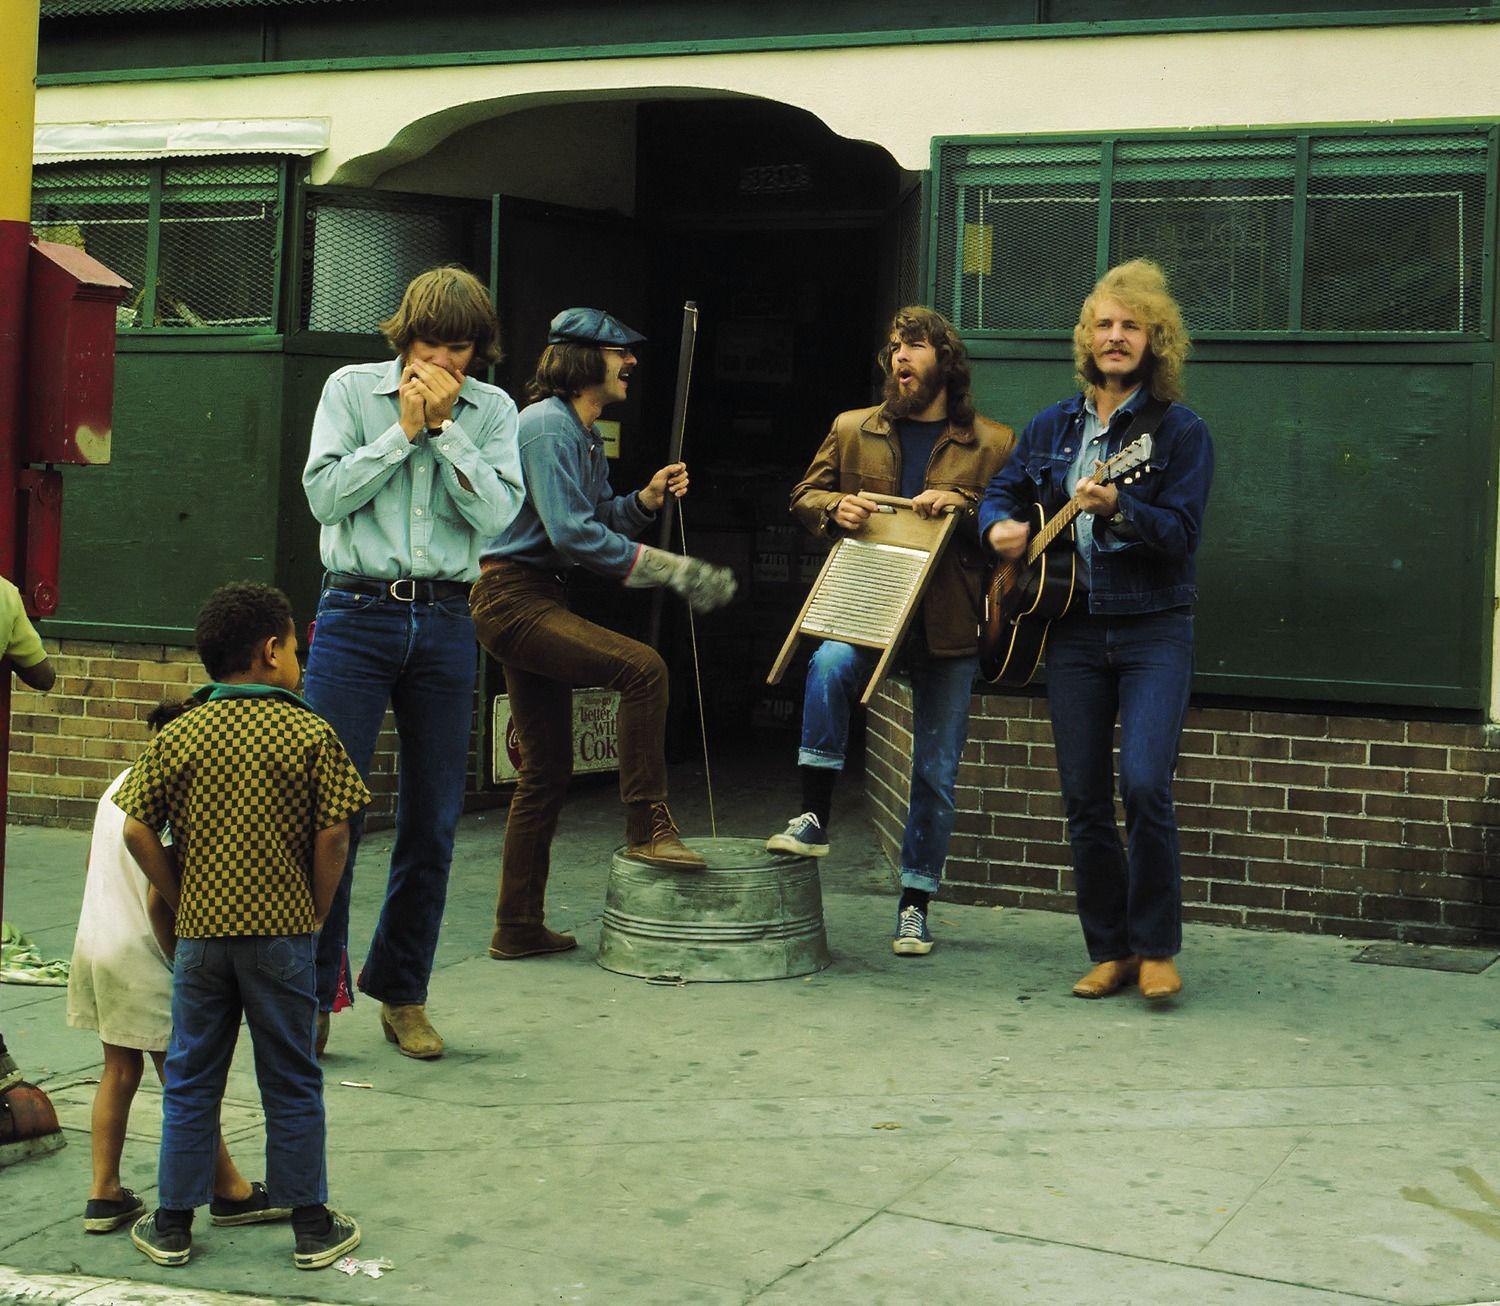 Creedence Clearwater Revival image Creedence Clearwater Revival